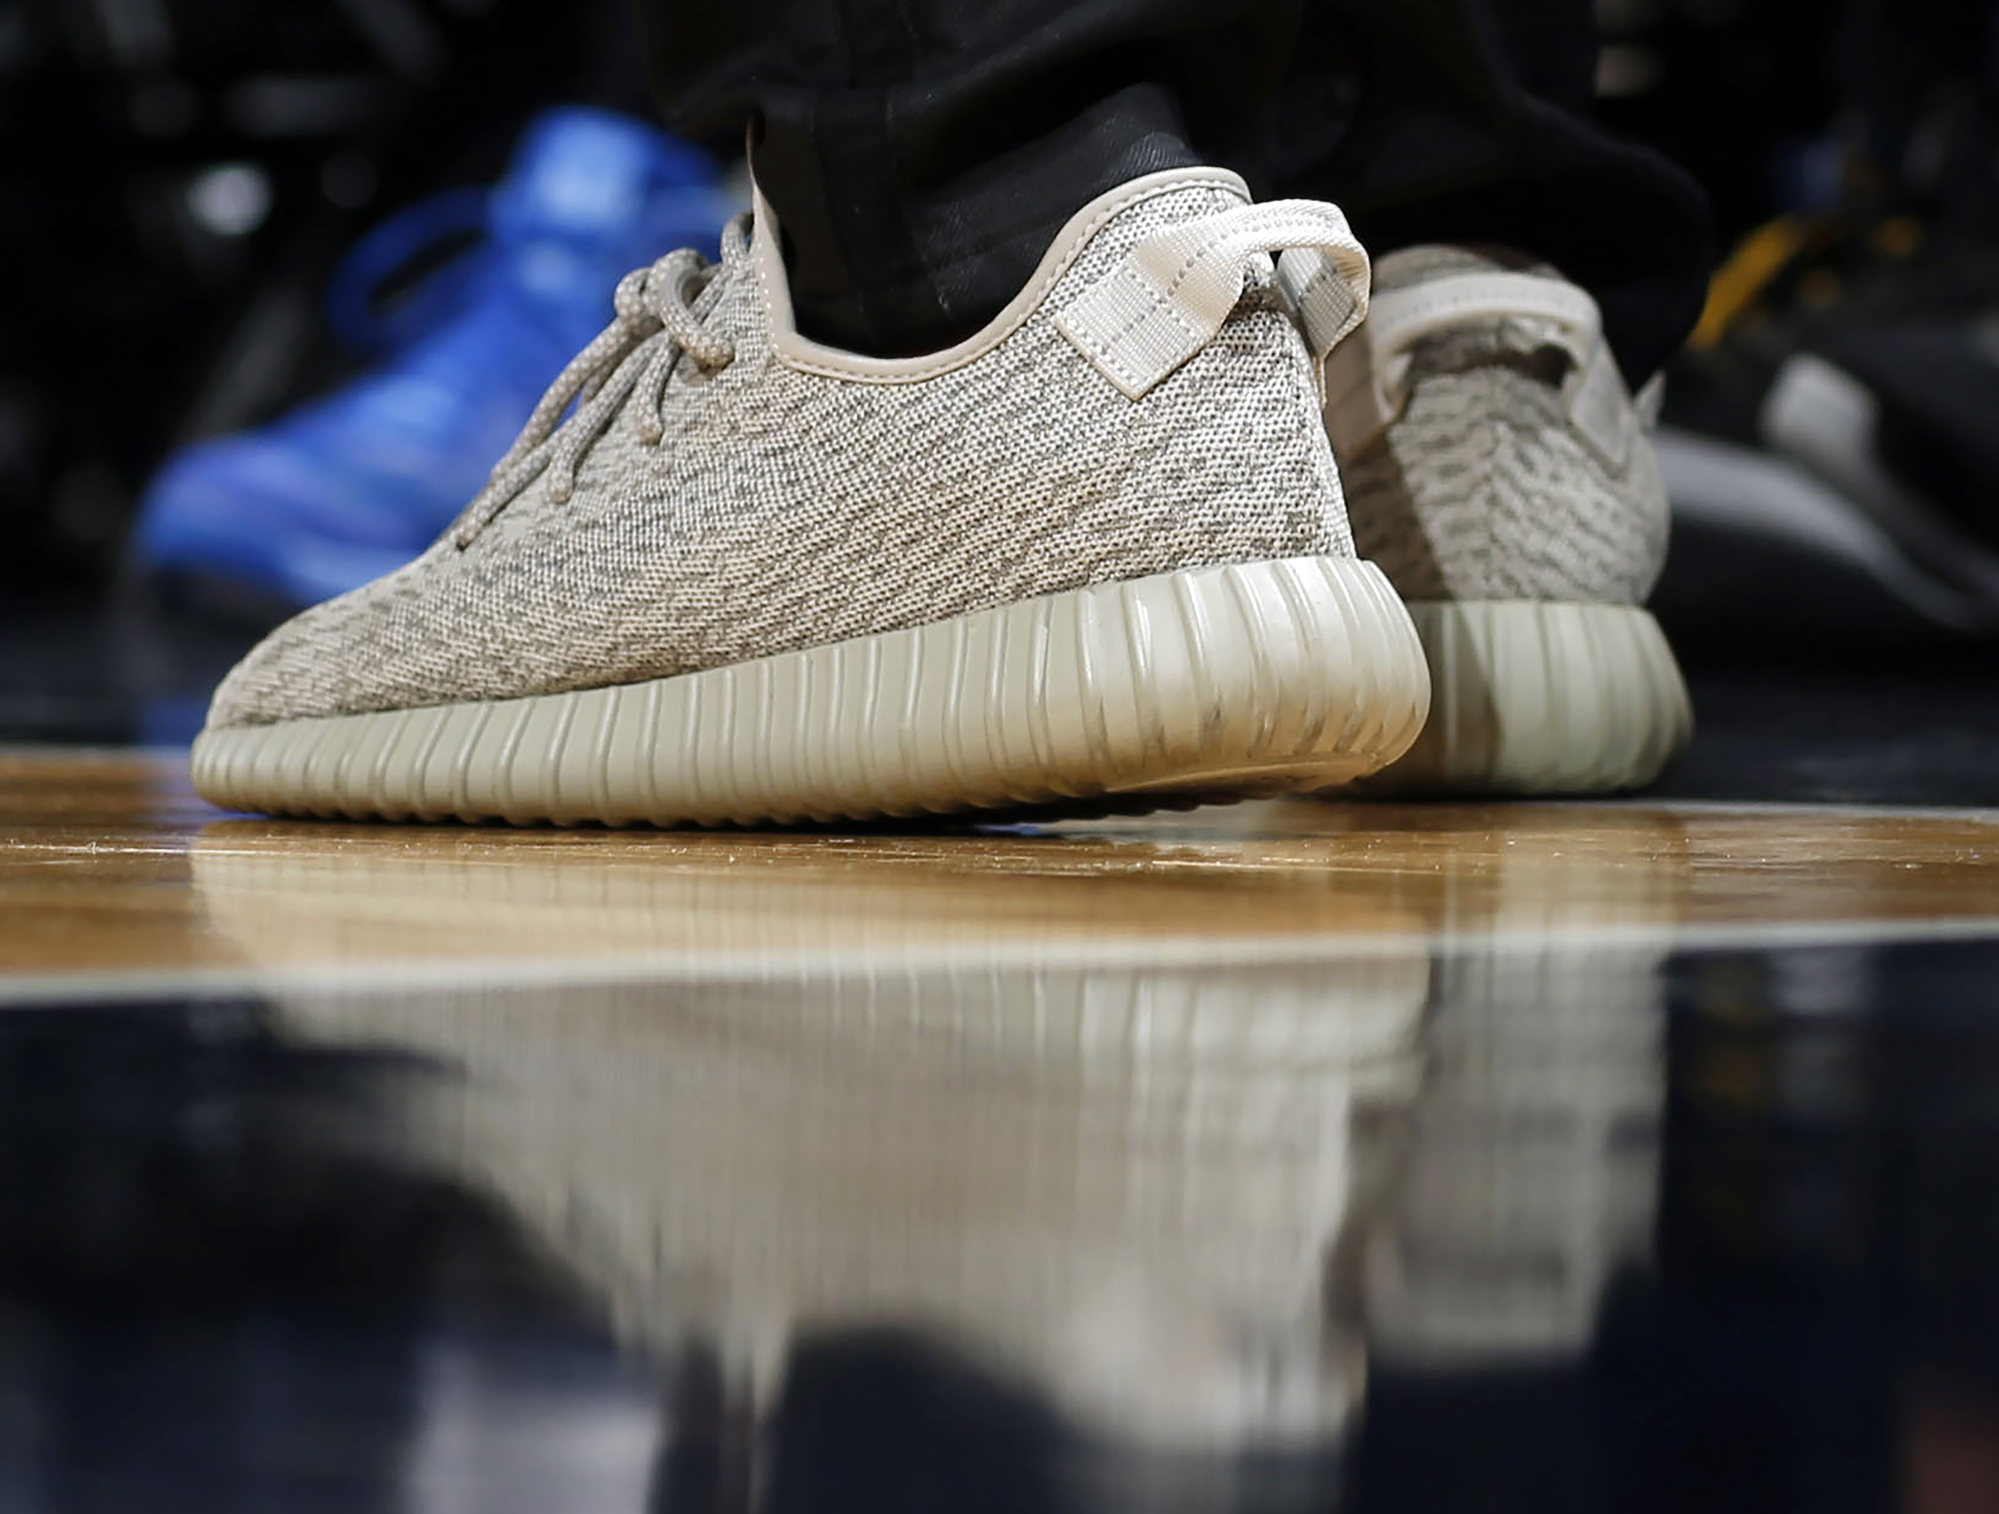 What's Next for Kanye West's Yeezy Brand as Adidas Copyright Feud